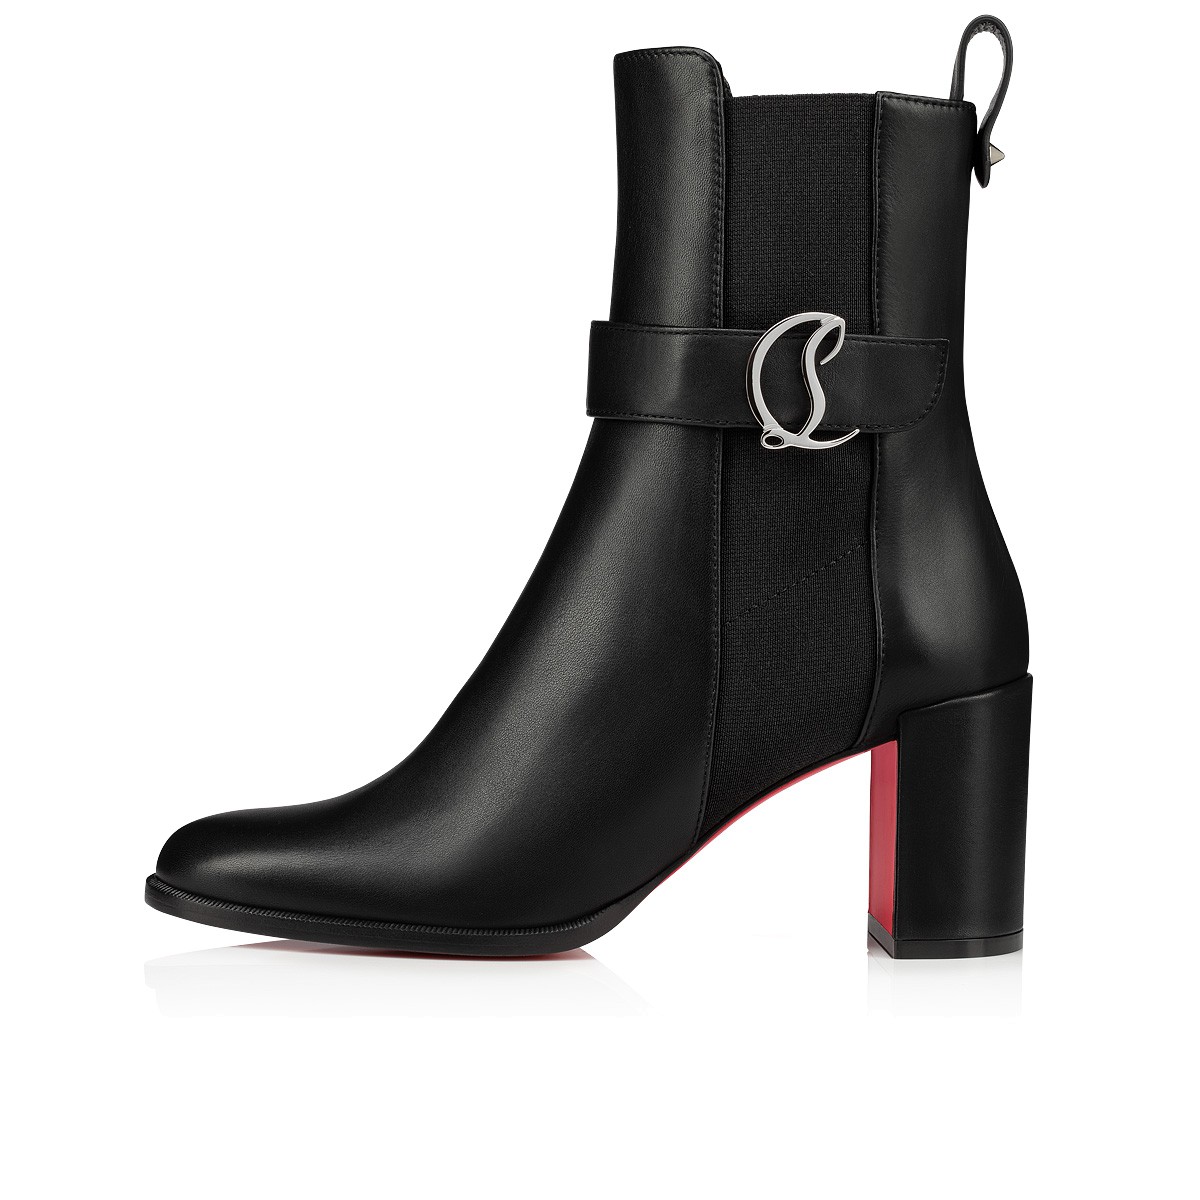 Shoes - Cl Chelsea Booty - Christian Louboutin